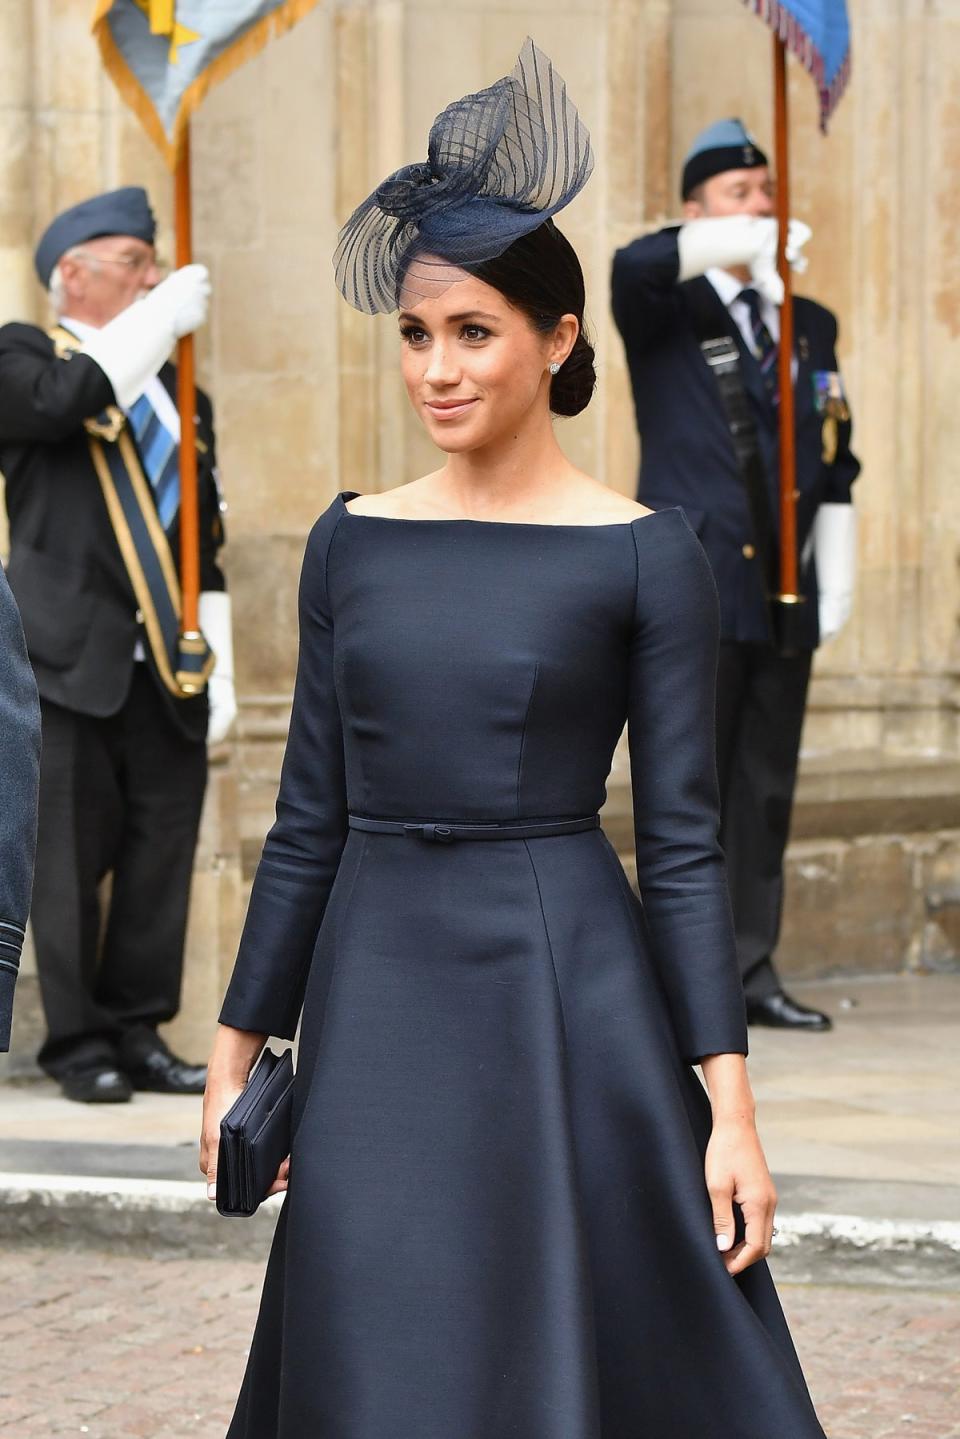 Meghan, Duchess of Sussex attends as members of the Royal Family attend events to mark the centenary of the RAF on July 10, 2018 (Getty Images)